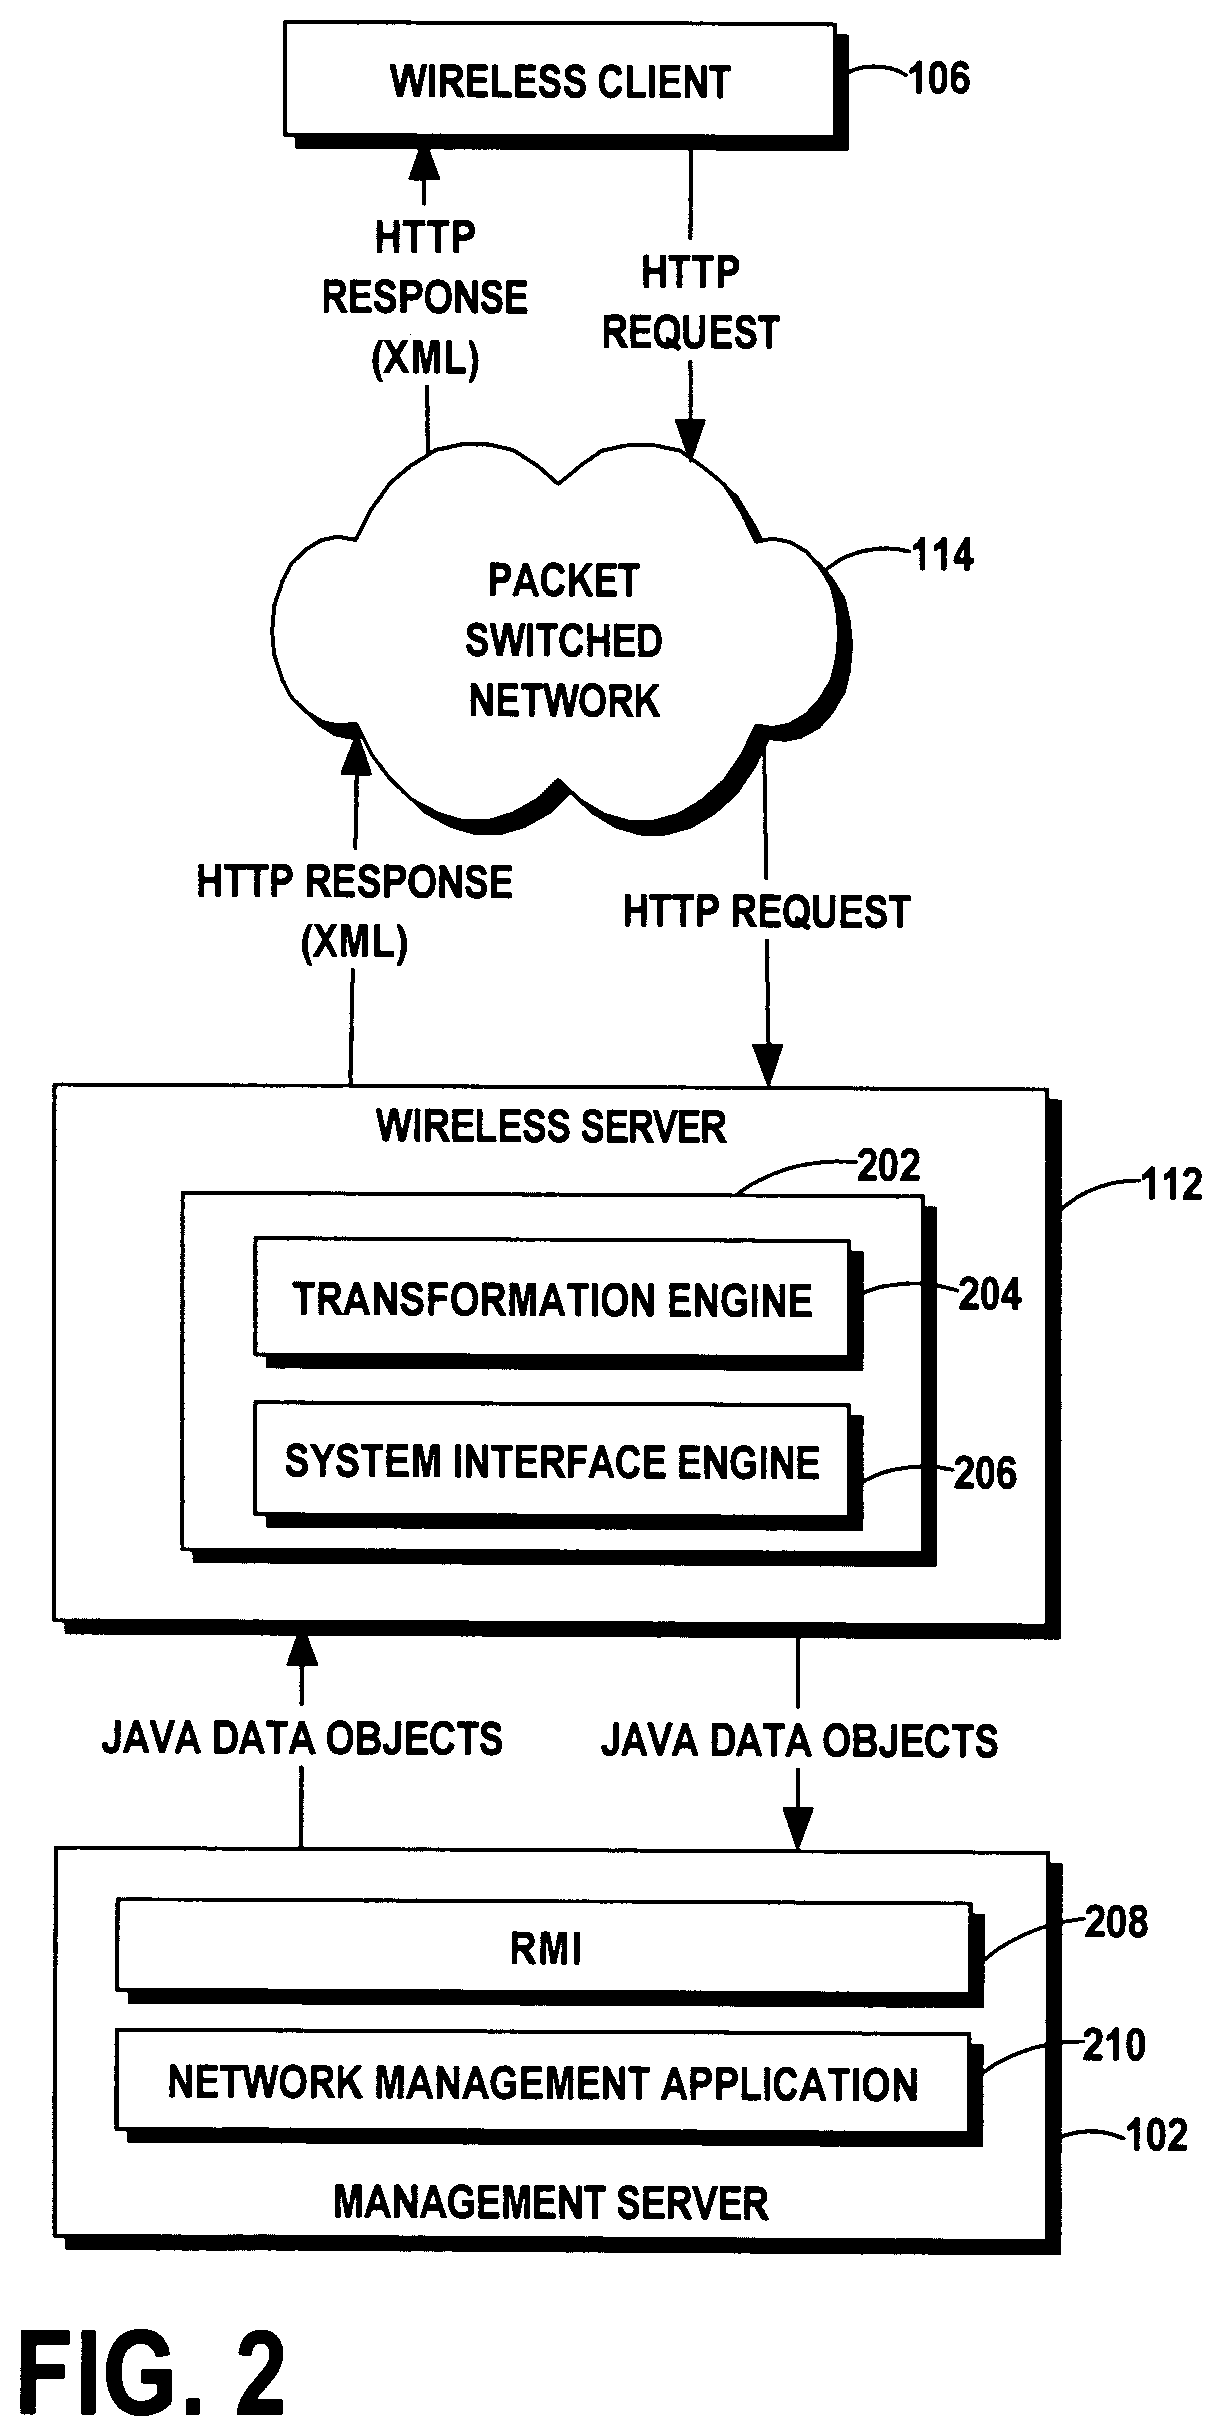 Apparatus, system, and method for wireless management of a distributed computer system